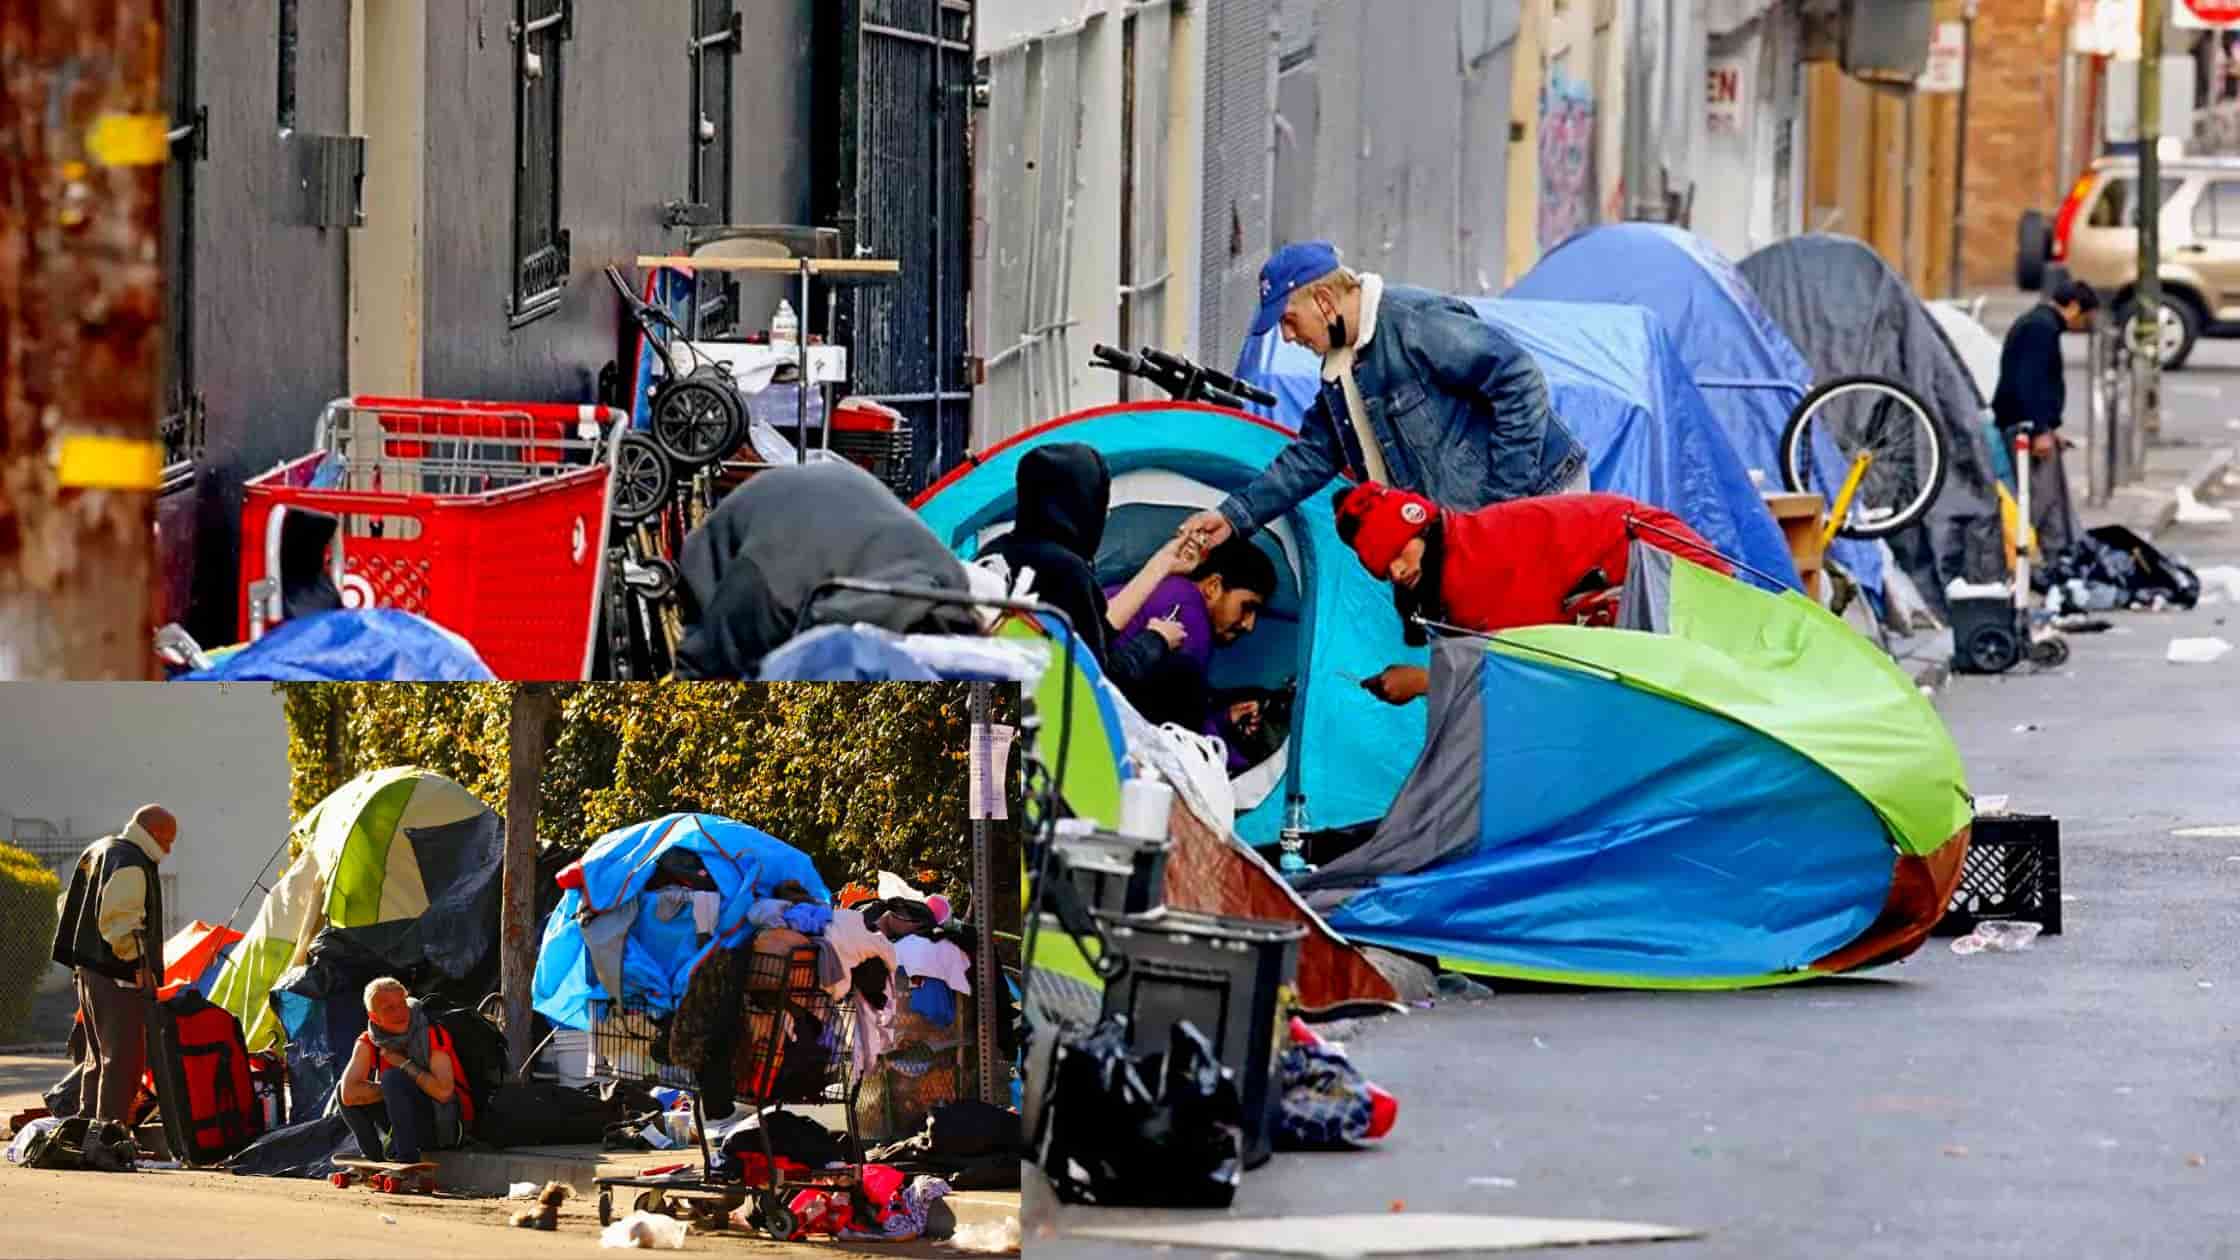 Mayor Of Los Angeles To Issue State Of Emergency For Homeless